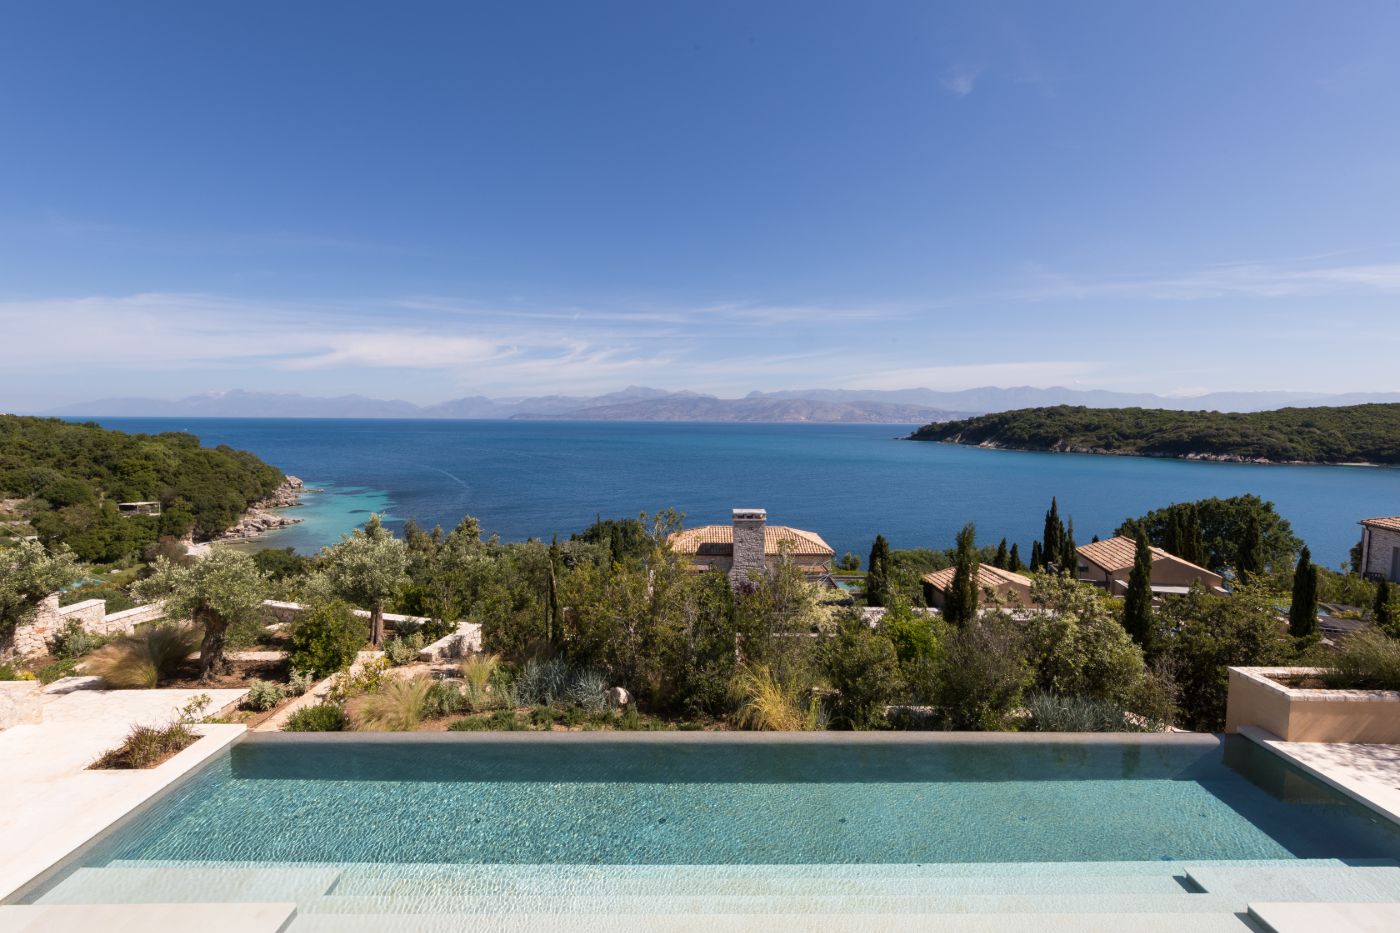 View of the pool and coastline from Villa Epirus